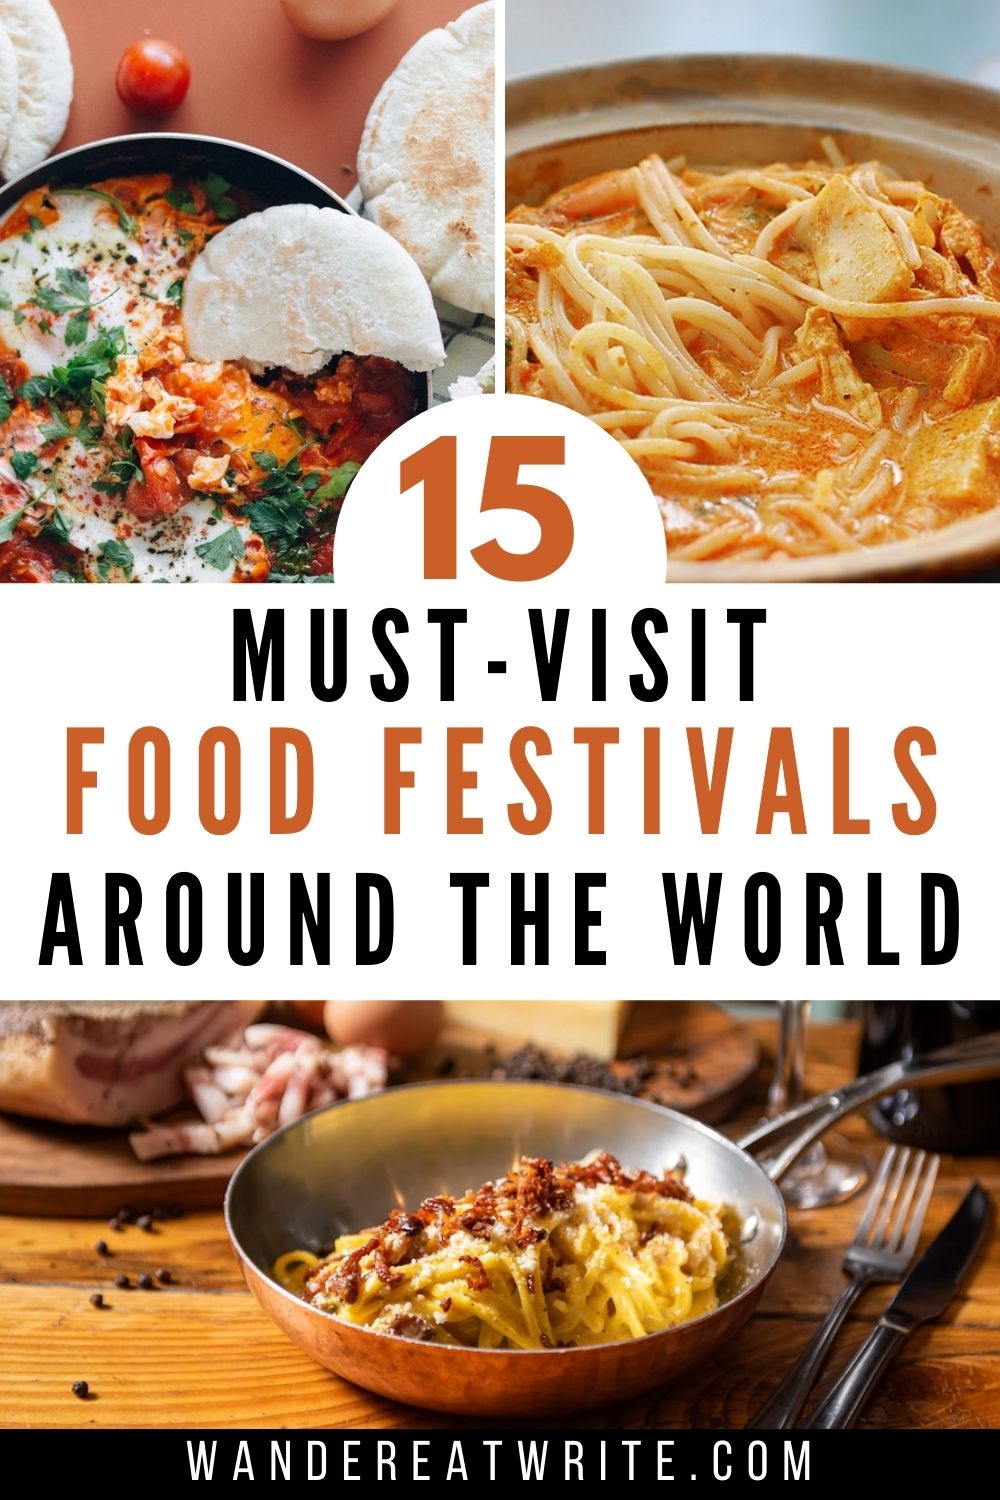 Text: 15 must-visit food festivals around the world; Top left photo: skillet of shakshuka with poached eggs in tomato sauce; pita bread, and falafel; Top right photo: claypot laksa noodles; bottom photo: skillet of carbonara pasta with bacon